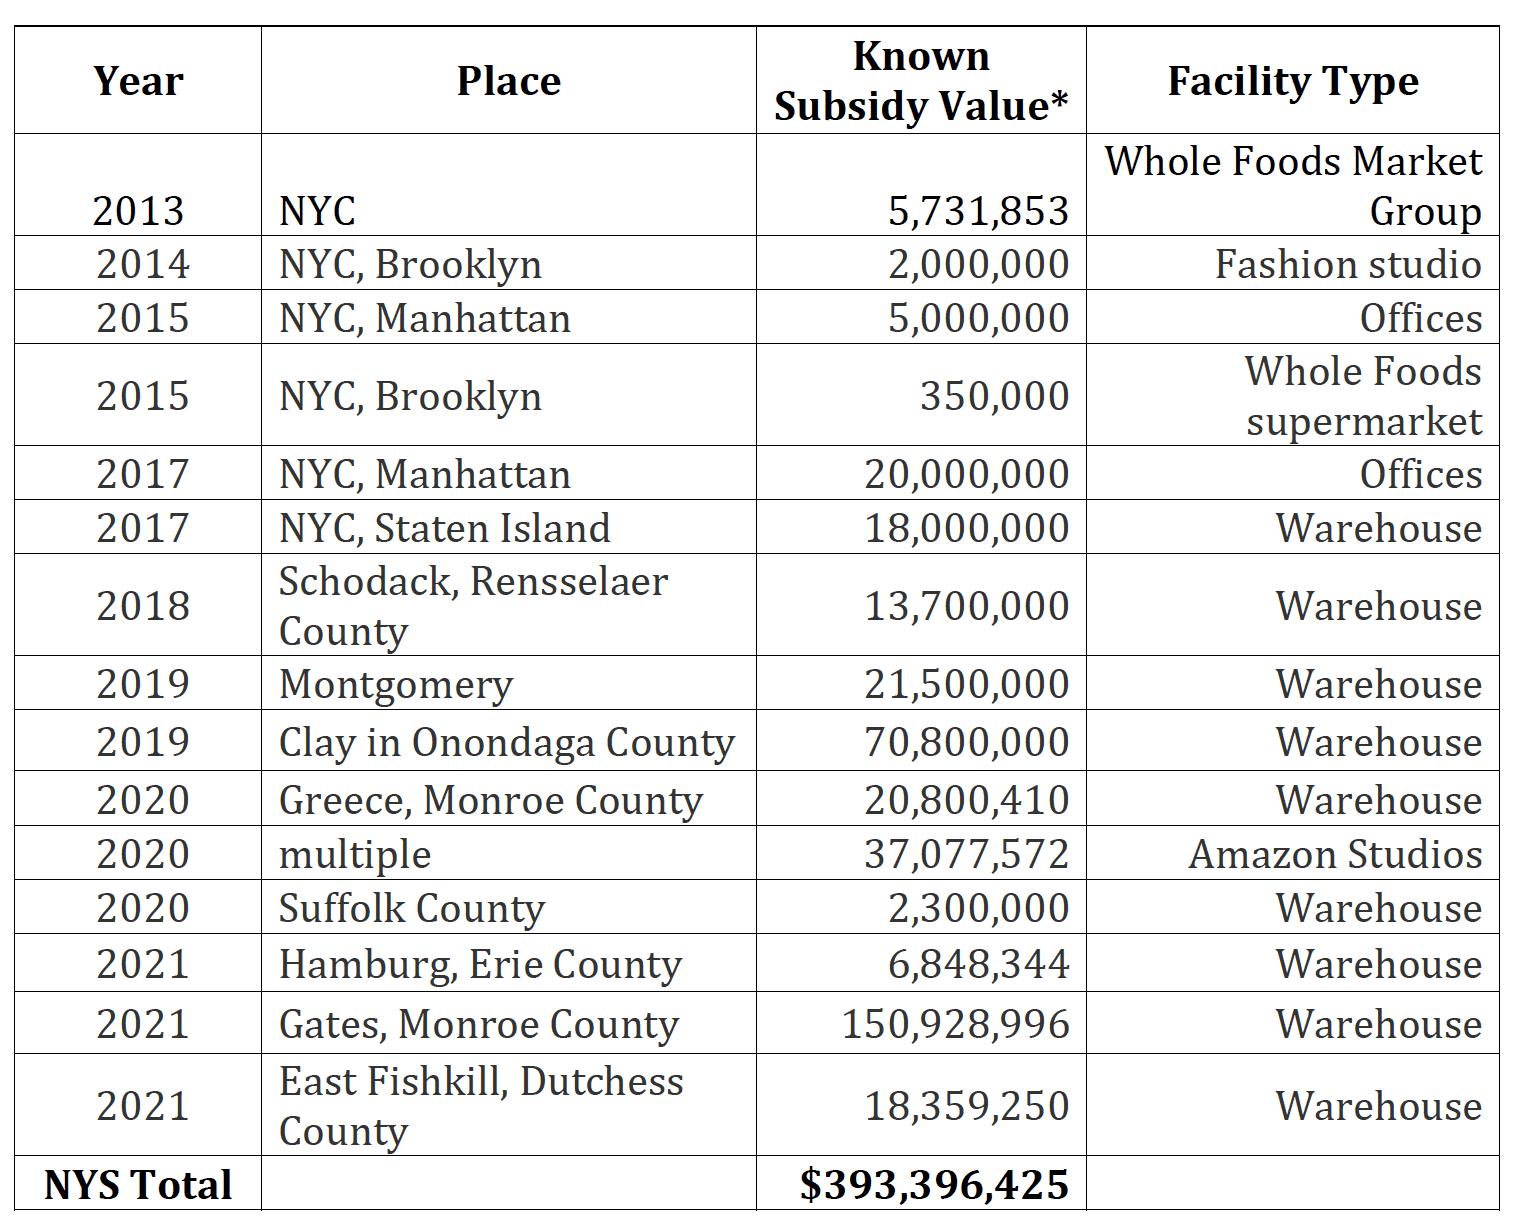 Image shows a list of the New York Amazon facilities that have receieved public subsidies. It is almost $400 million.